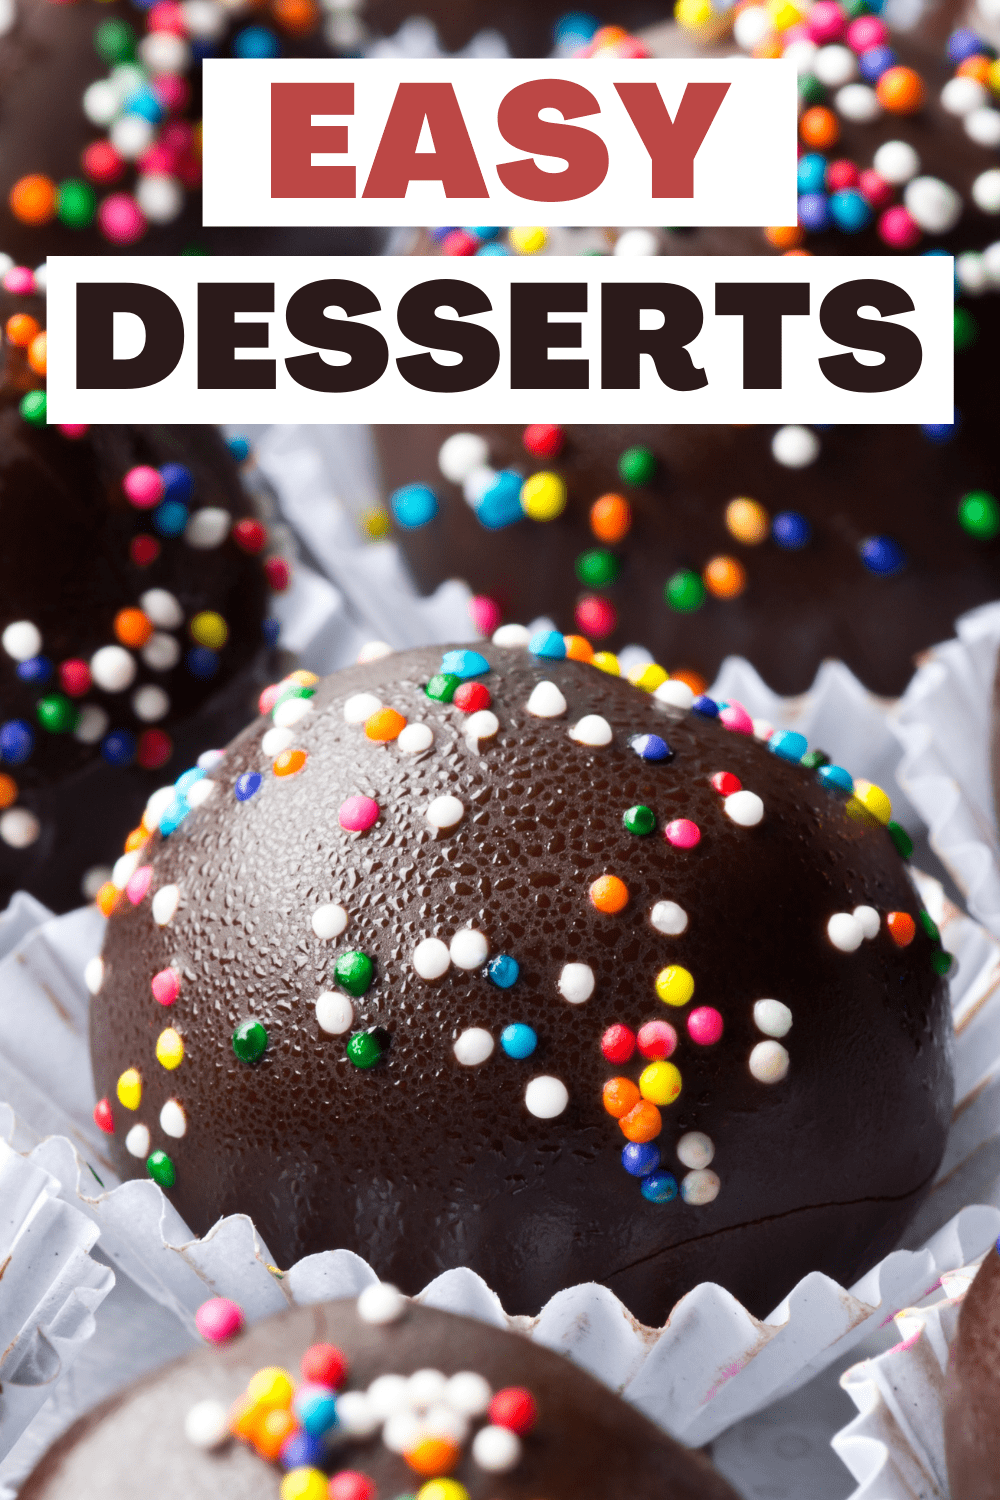 Desserts Easy To Make At Home - BEST HOME DESIGN IDEAS